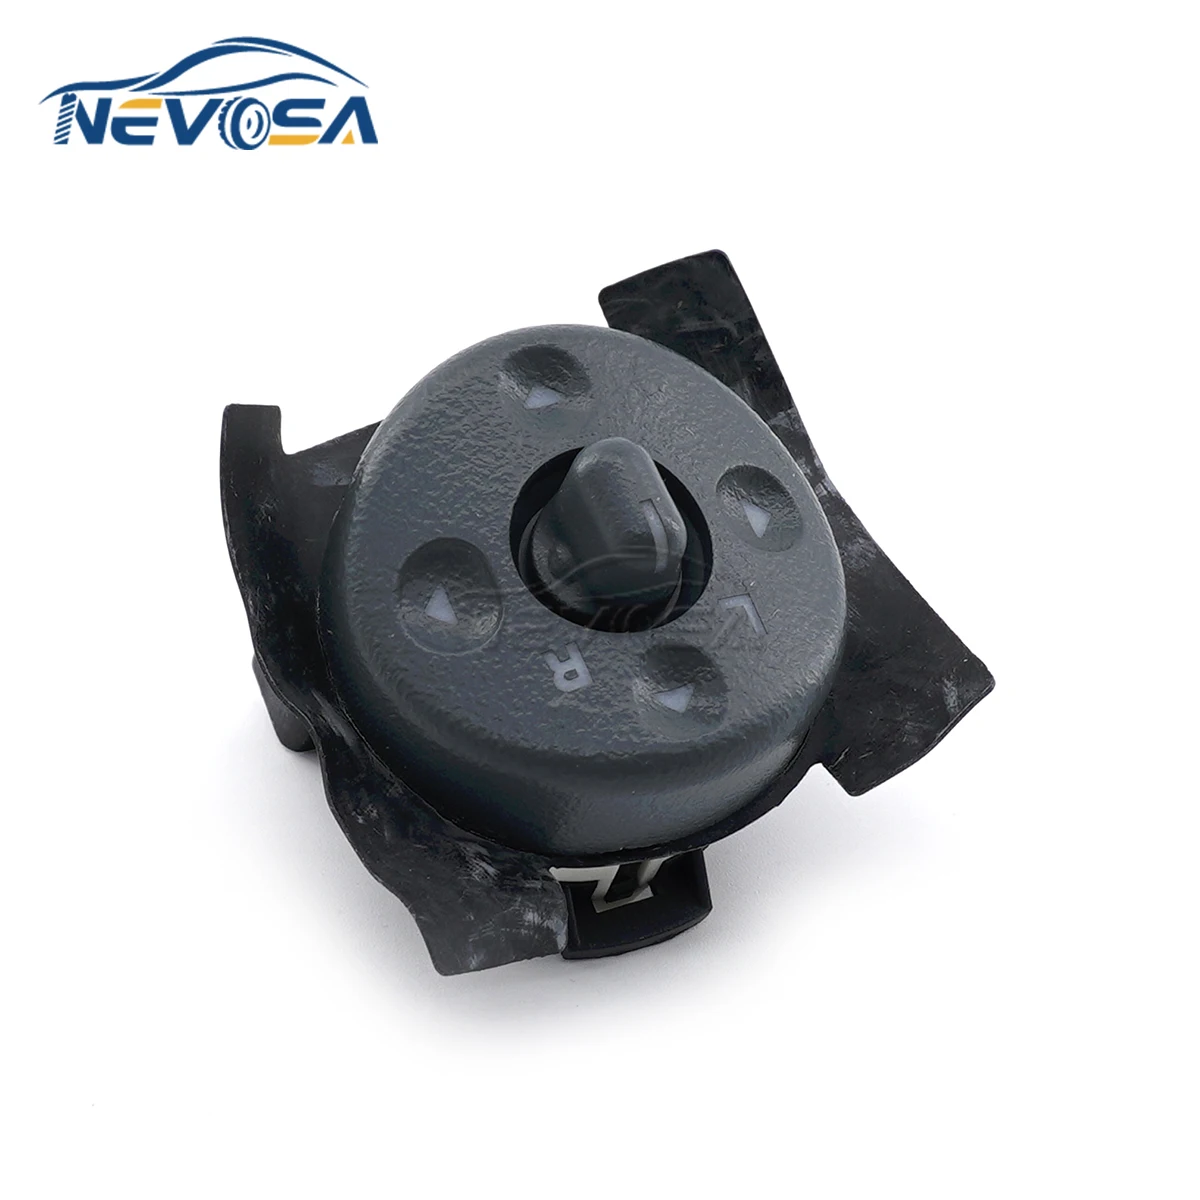 

NEVOSA 15009690 Car Power Mirror Switch Side View Button For Chevy GMC Tahoe Astro C/K Series 1998-2005 19209371